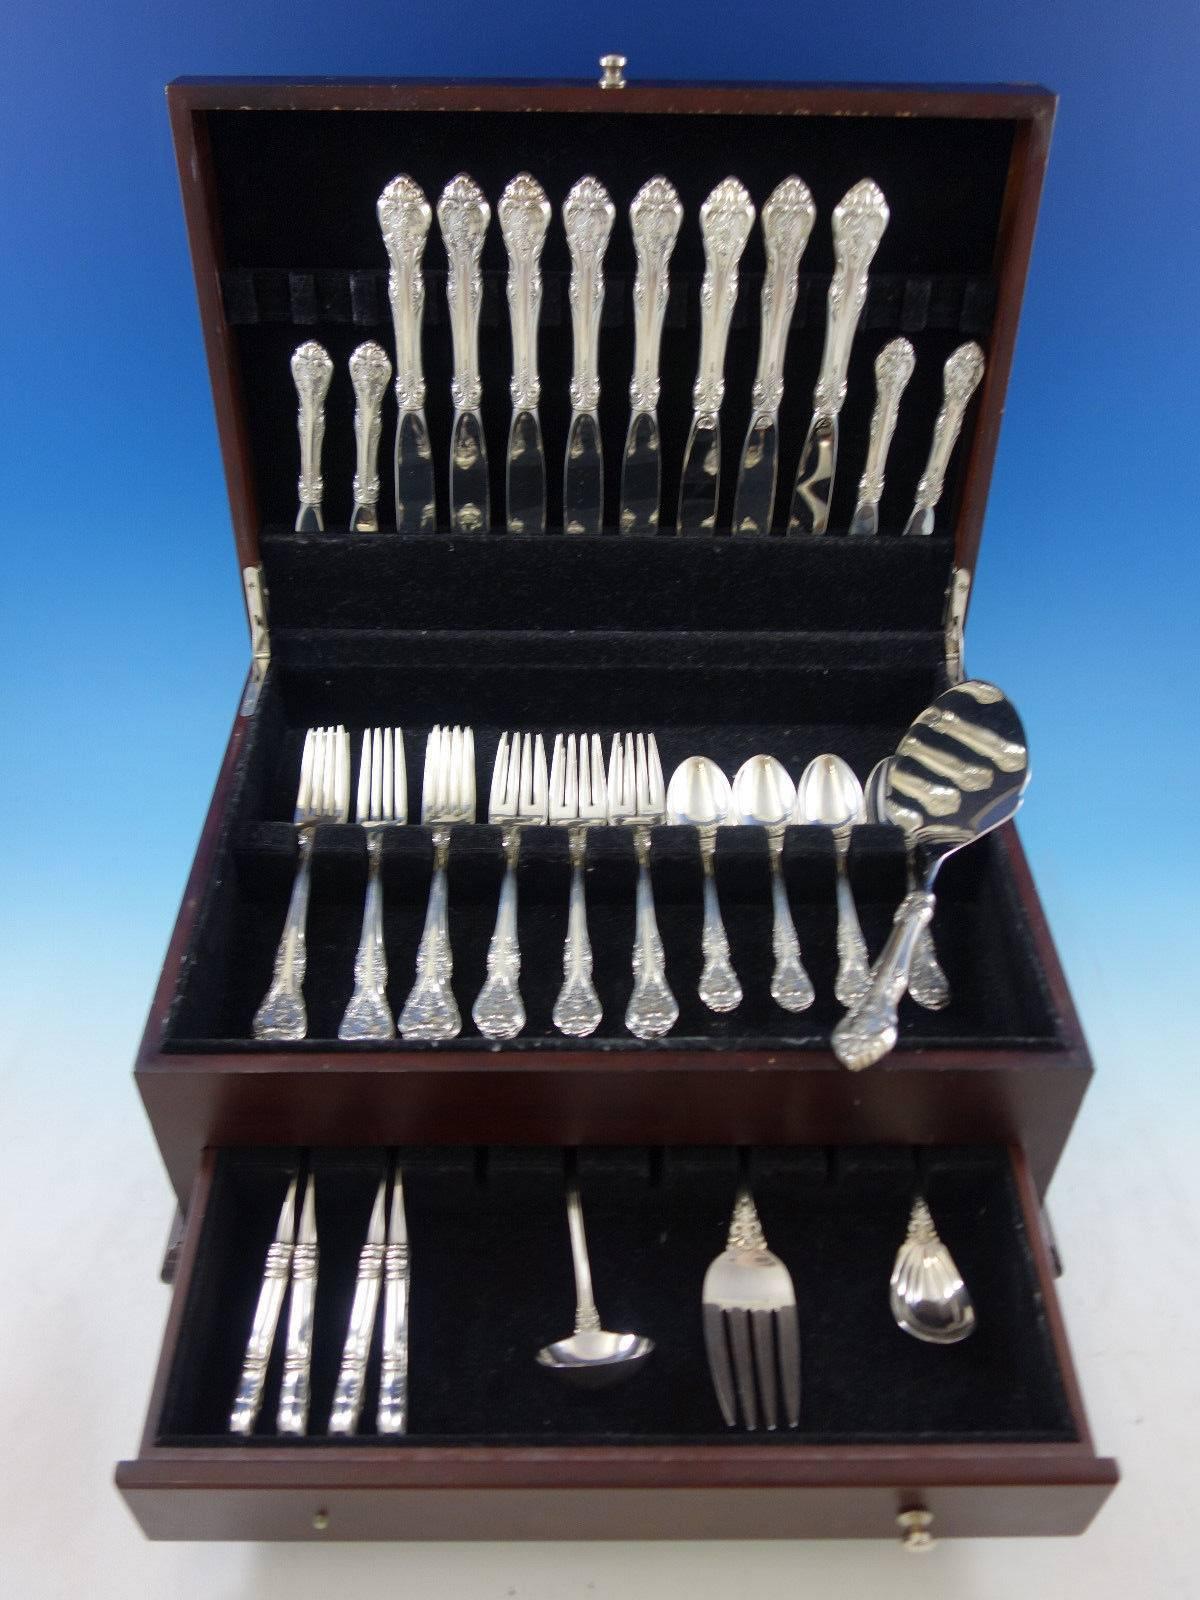 King Edward by Gorham sterling silver flatware set, 44 pieces. This set includes: 

Eight place size knives, 9 1/8